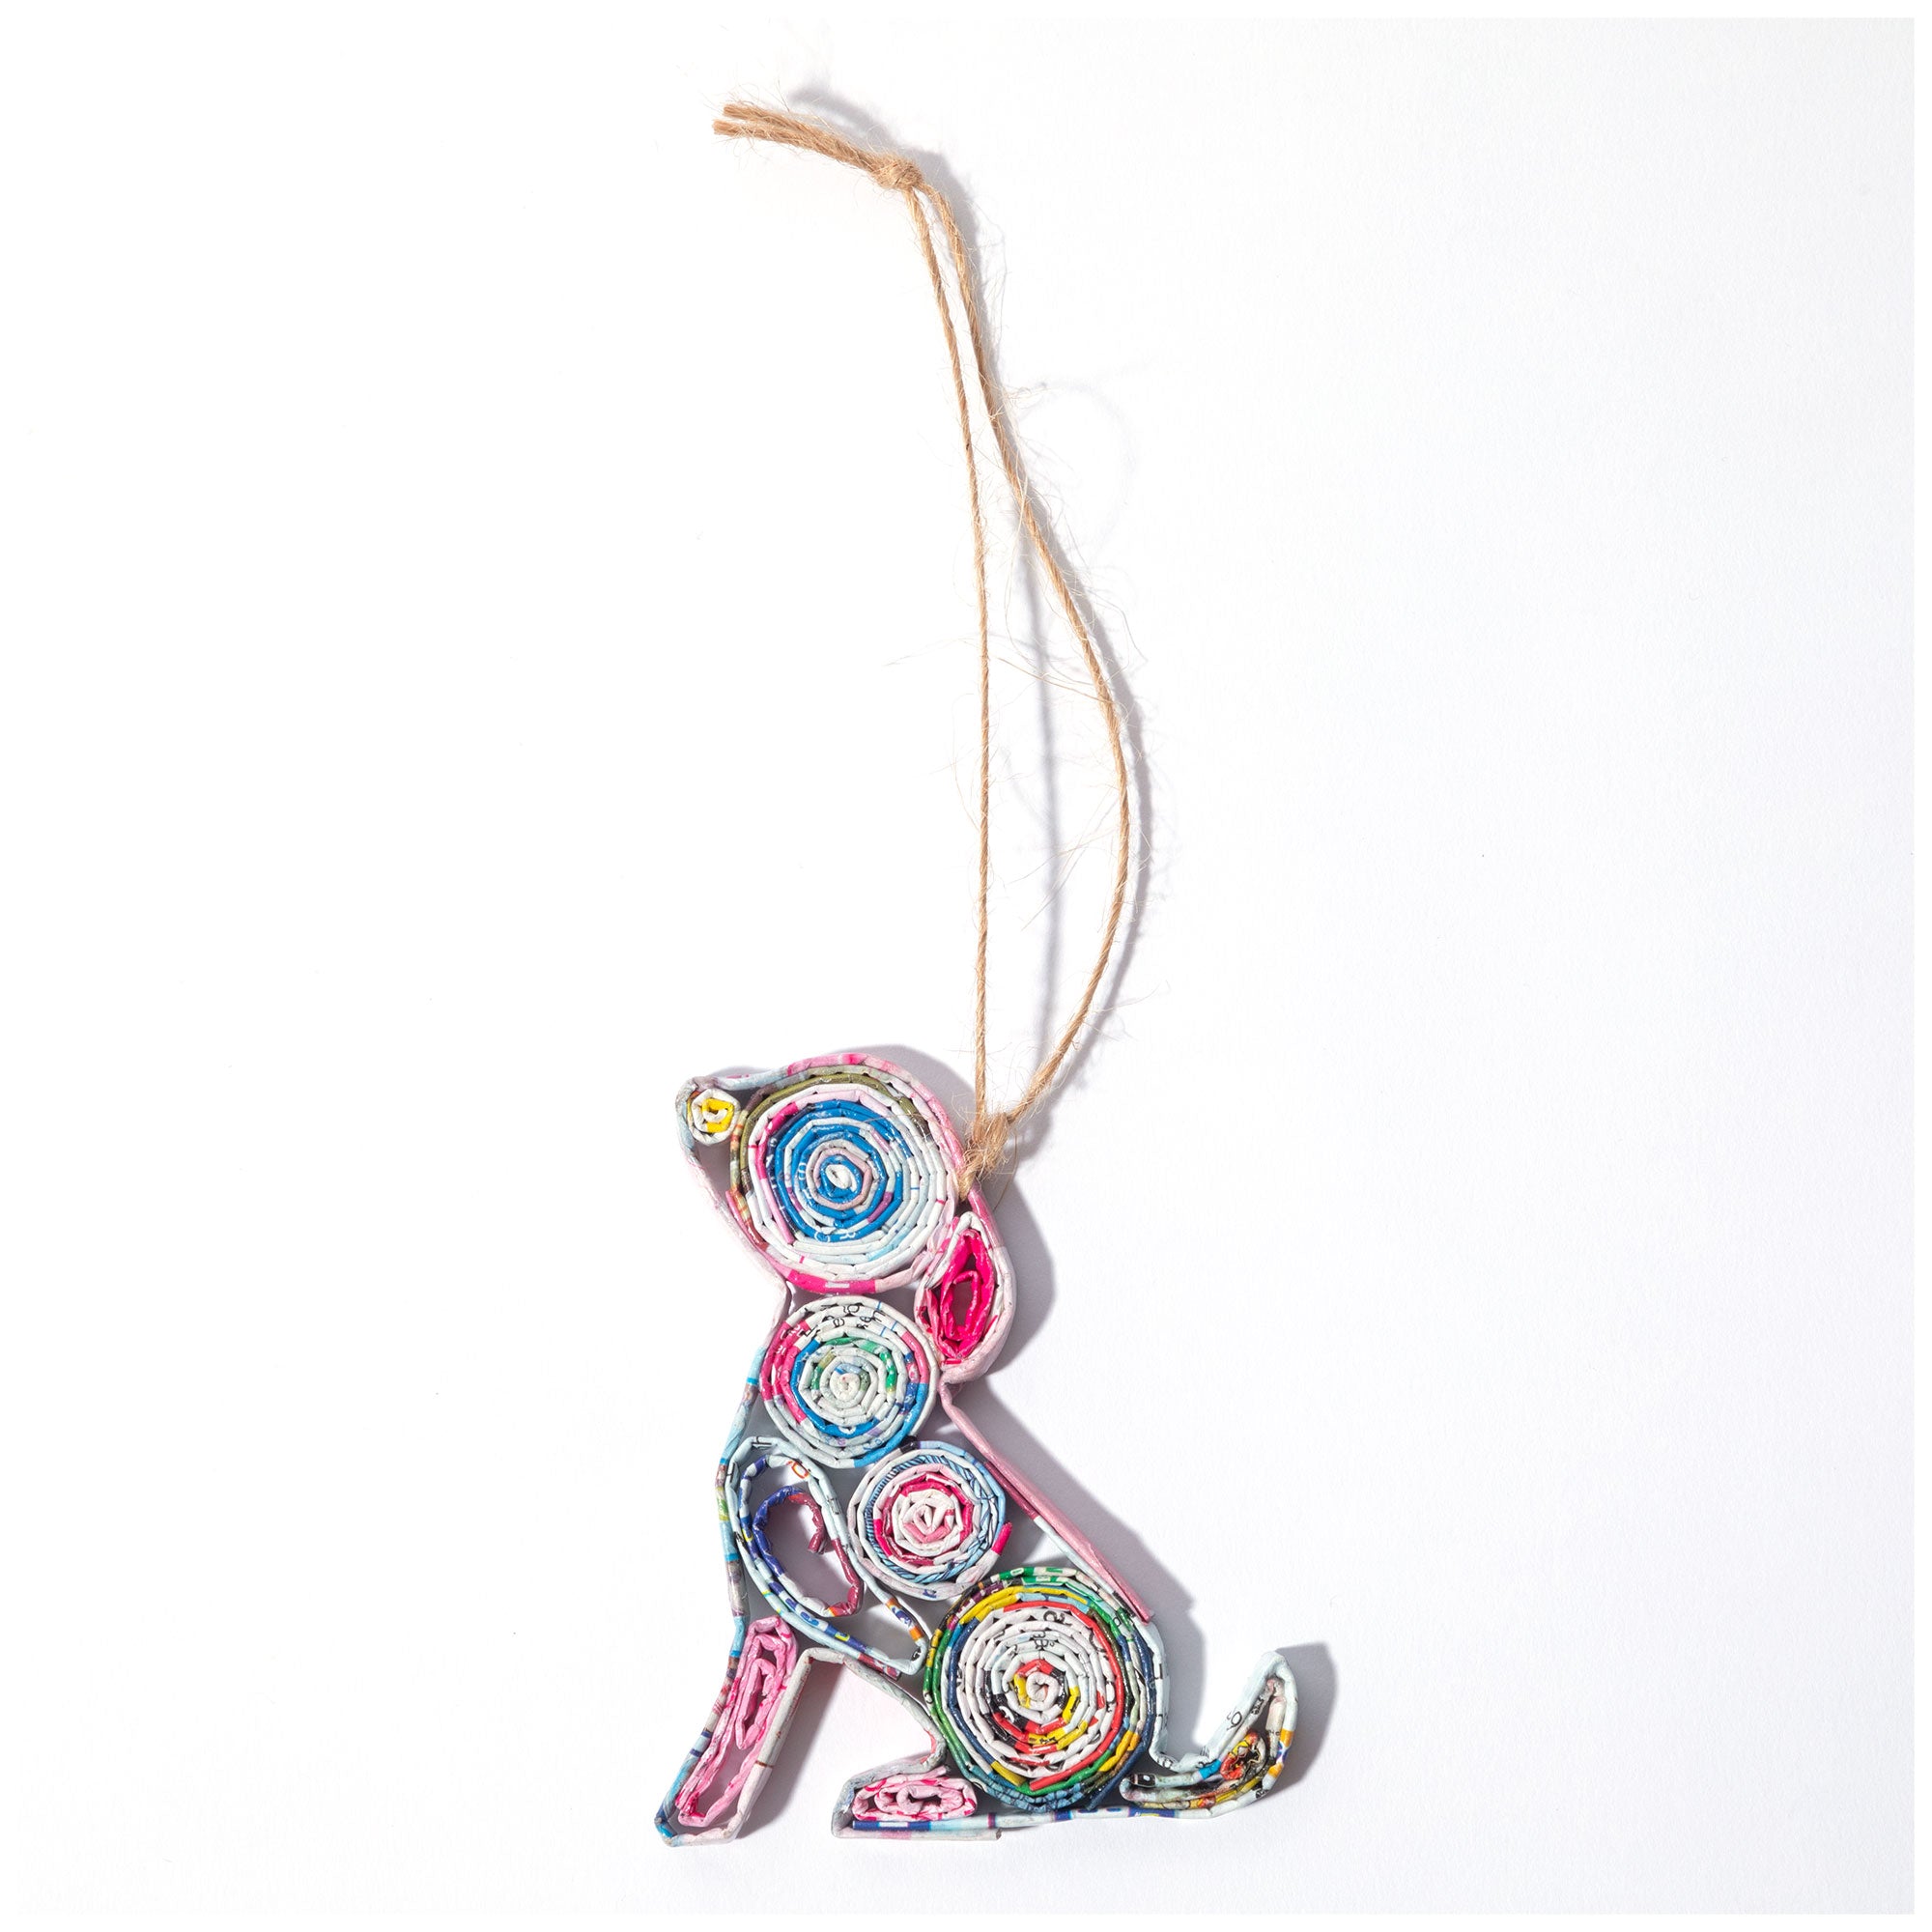 Recycled Magazine Furry Friend Ornament